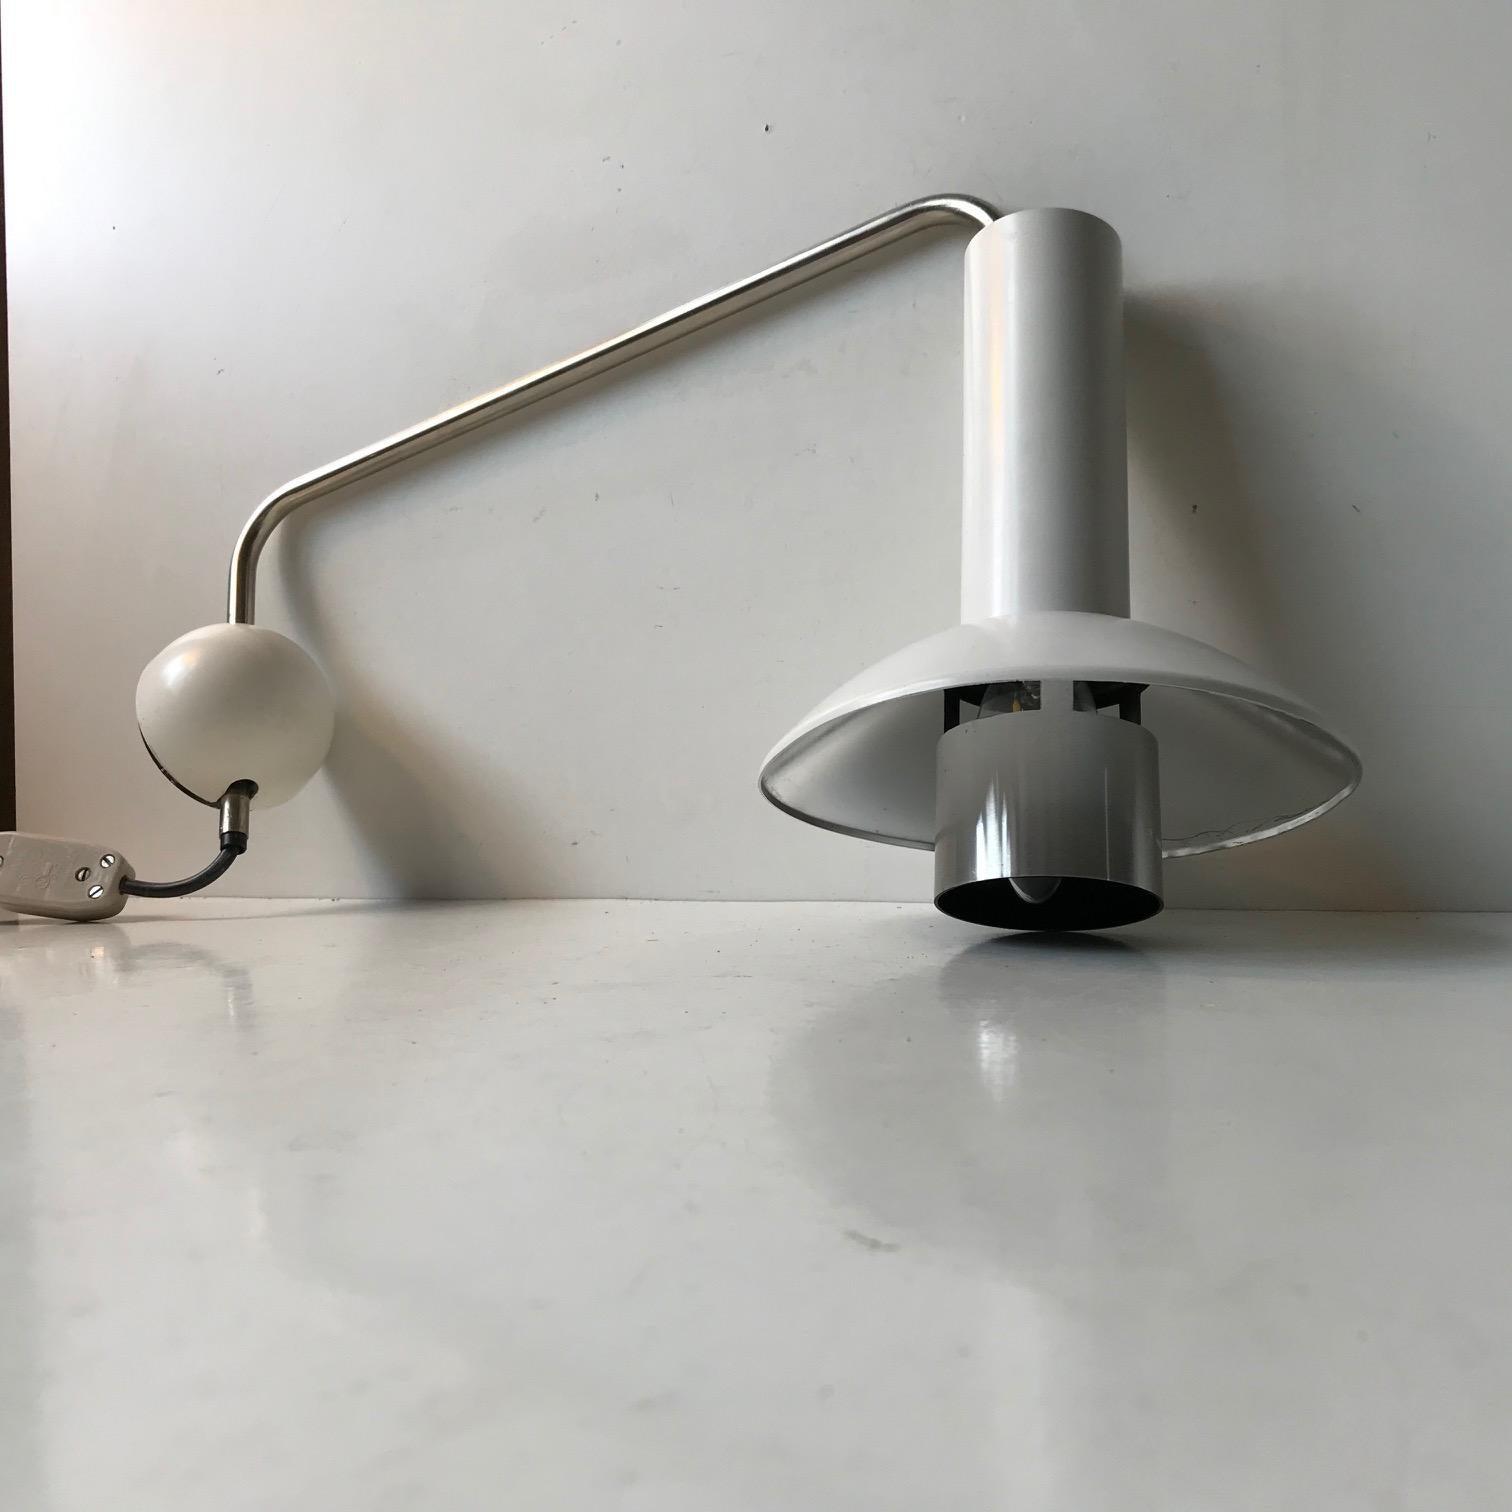 Louis Poulsen White Adjustable Wall Lamp, 1970s In Good Condition For Sale In Esbjerg, DK